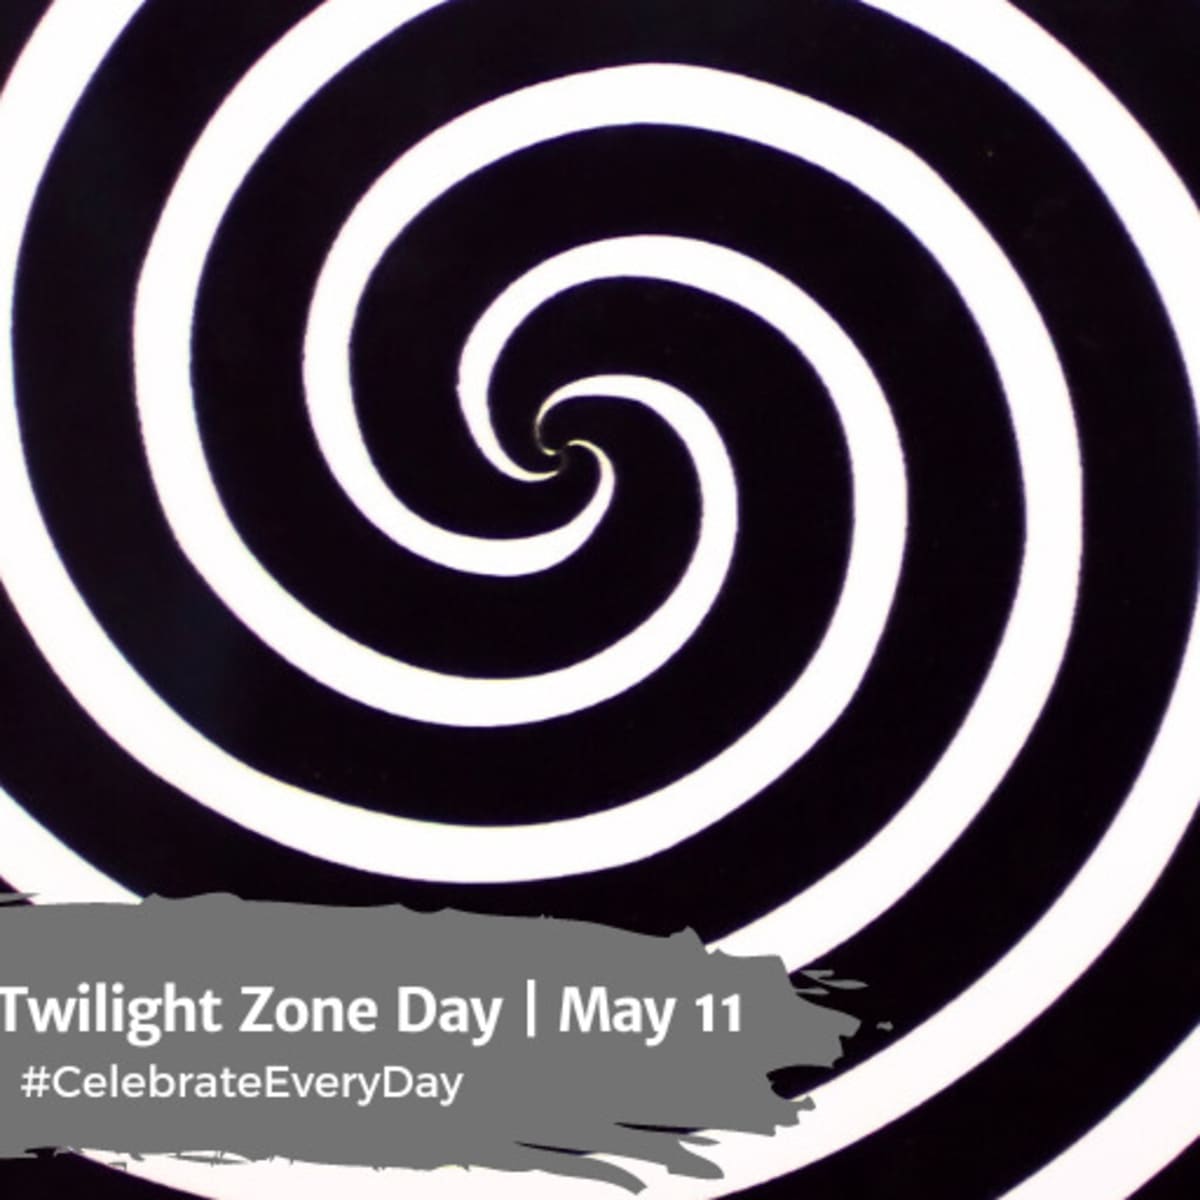 National Twilight Zone Day (May 11th)